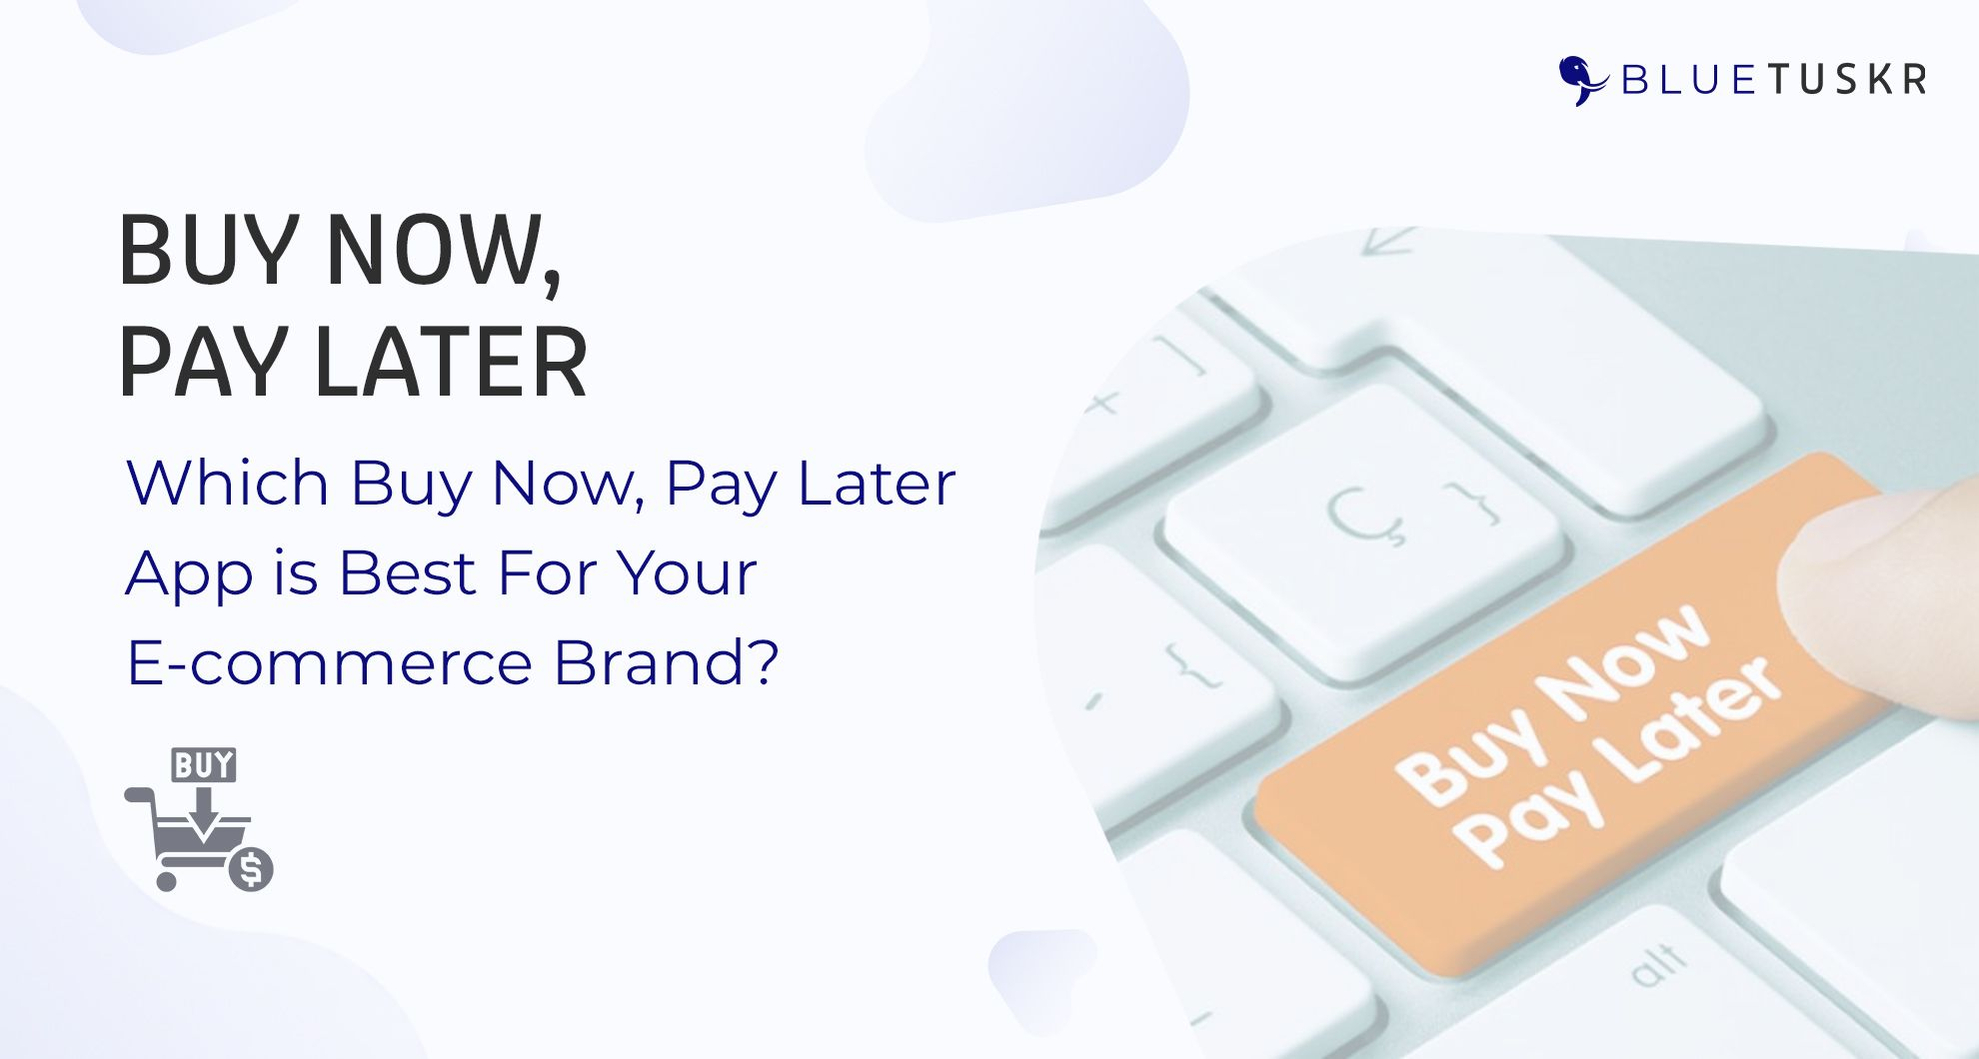 Which Buy Now, Pay Later App is Best For Your E-commerce Brand?